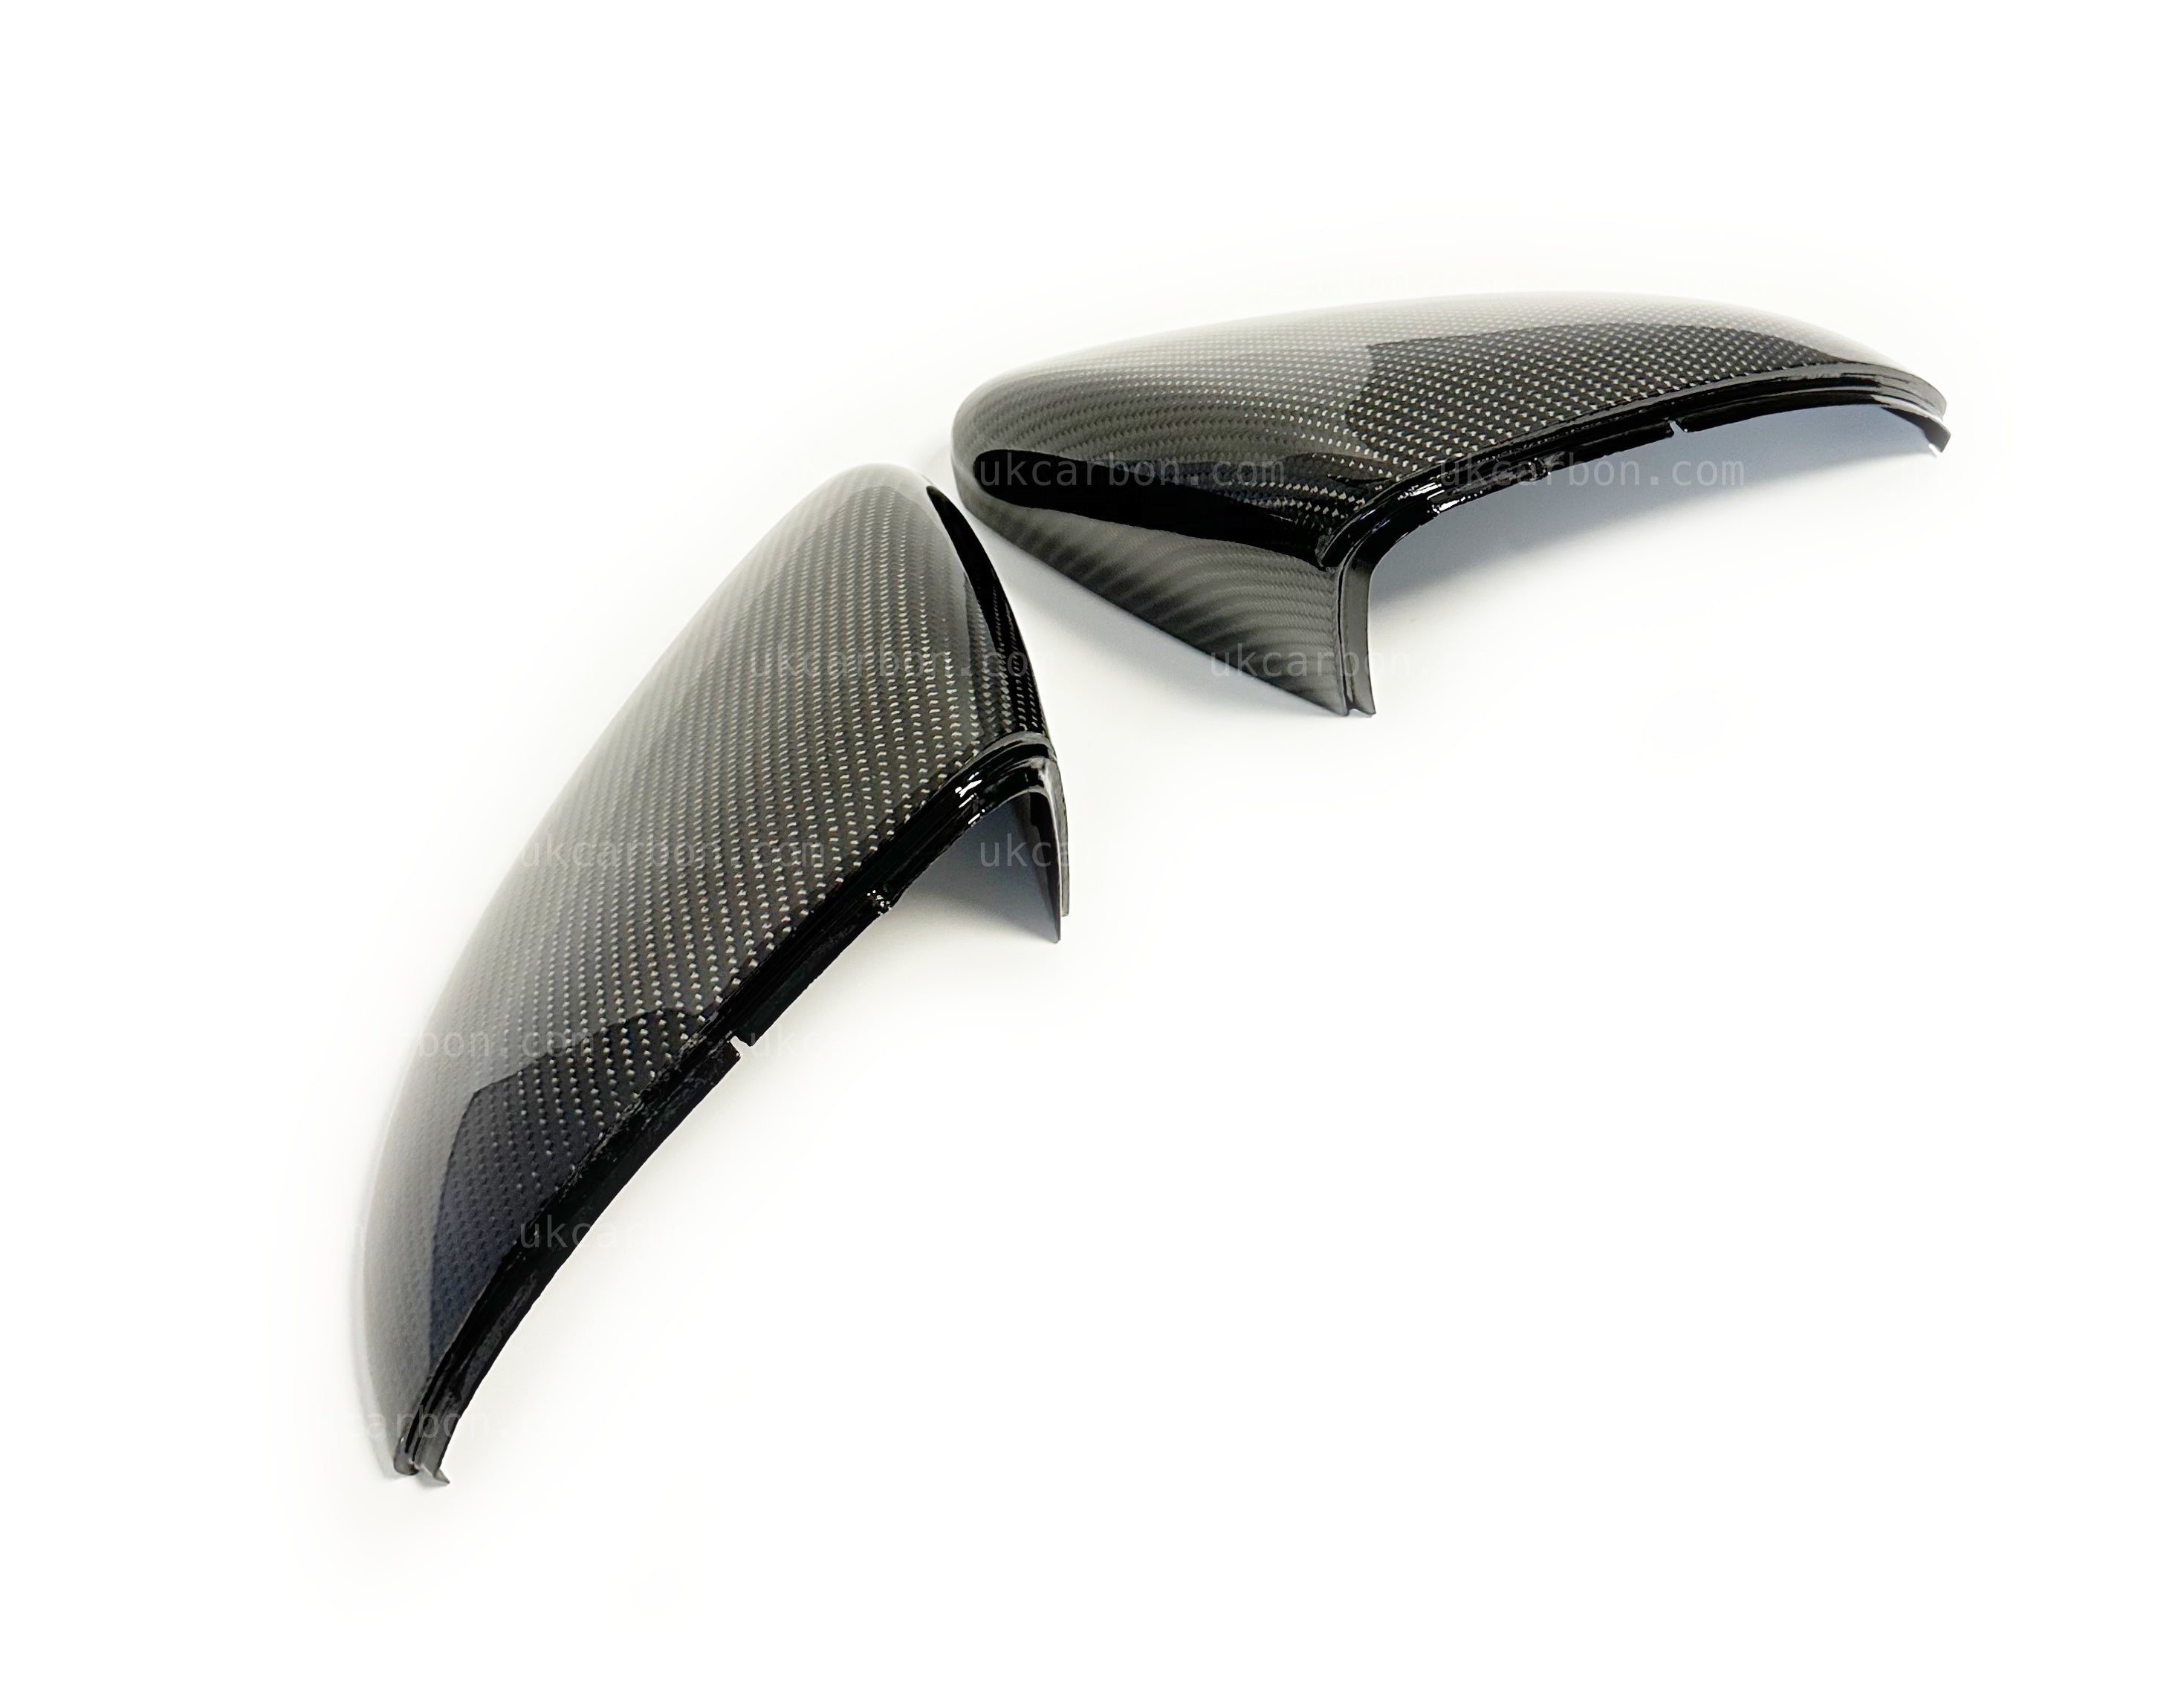 UKCARBON Carbon Fibre Wing Mirror Cover Replacements For VW Golf MK7 GTI R